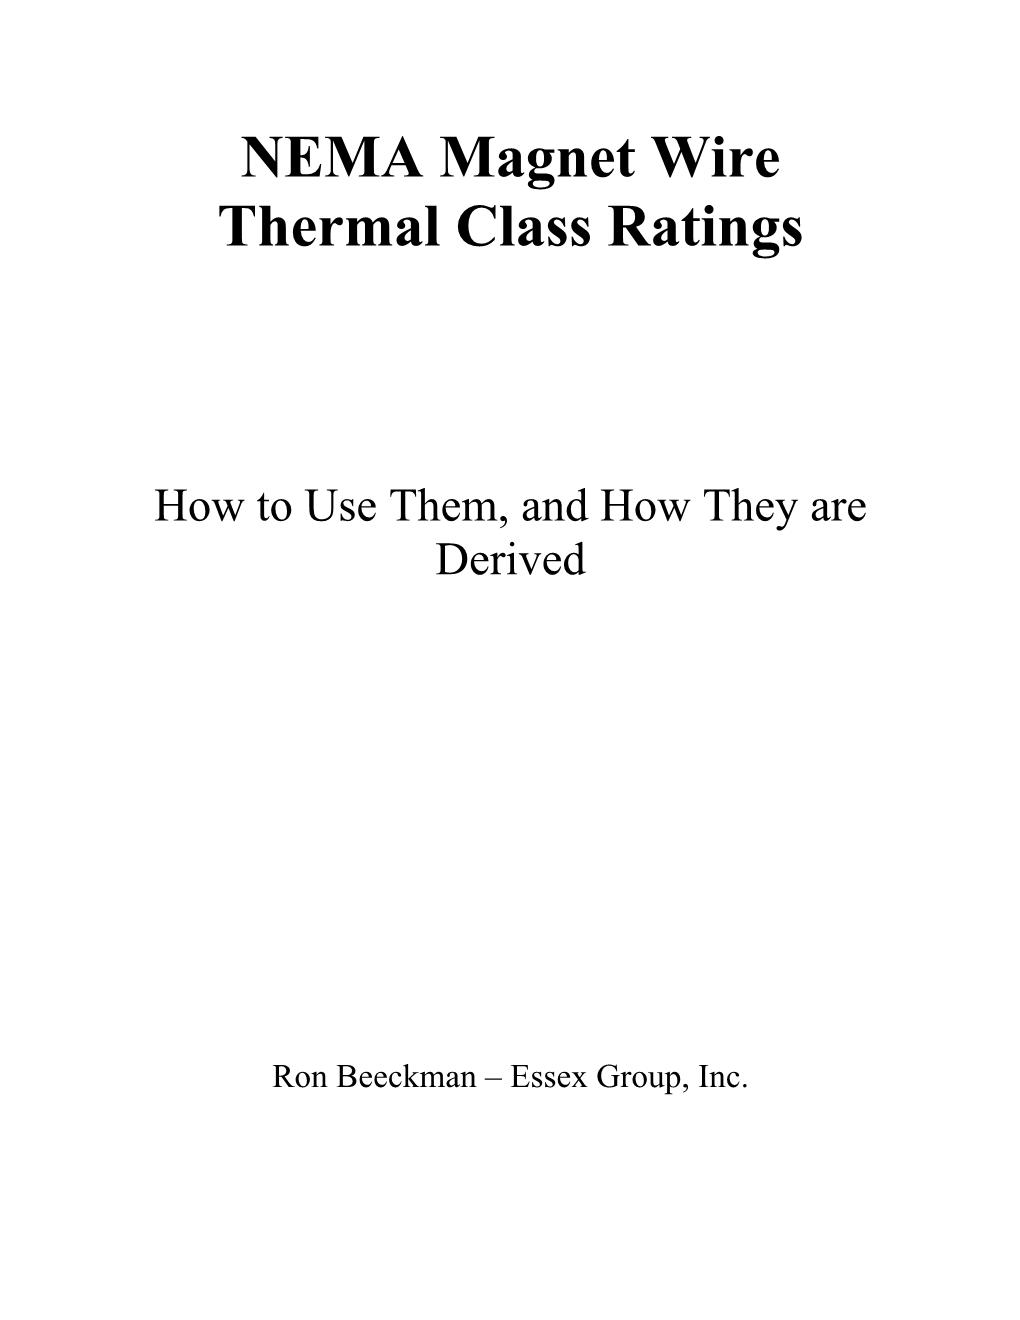 NEMA Magnet Wire Thermal Class Ratings